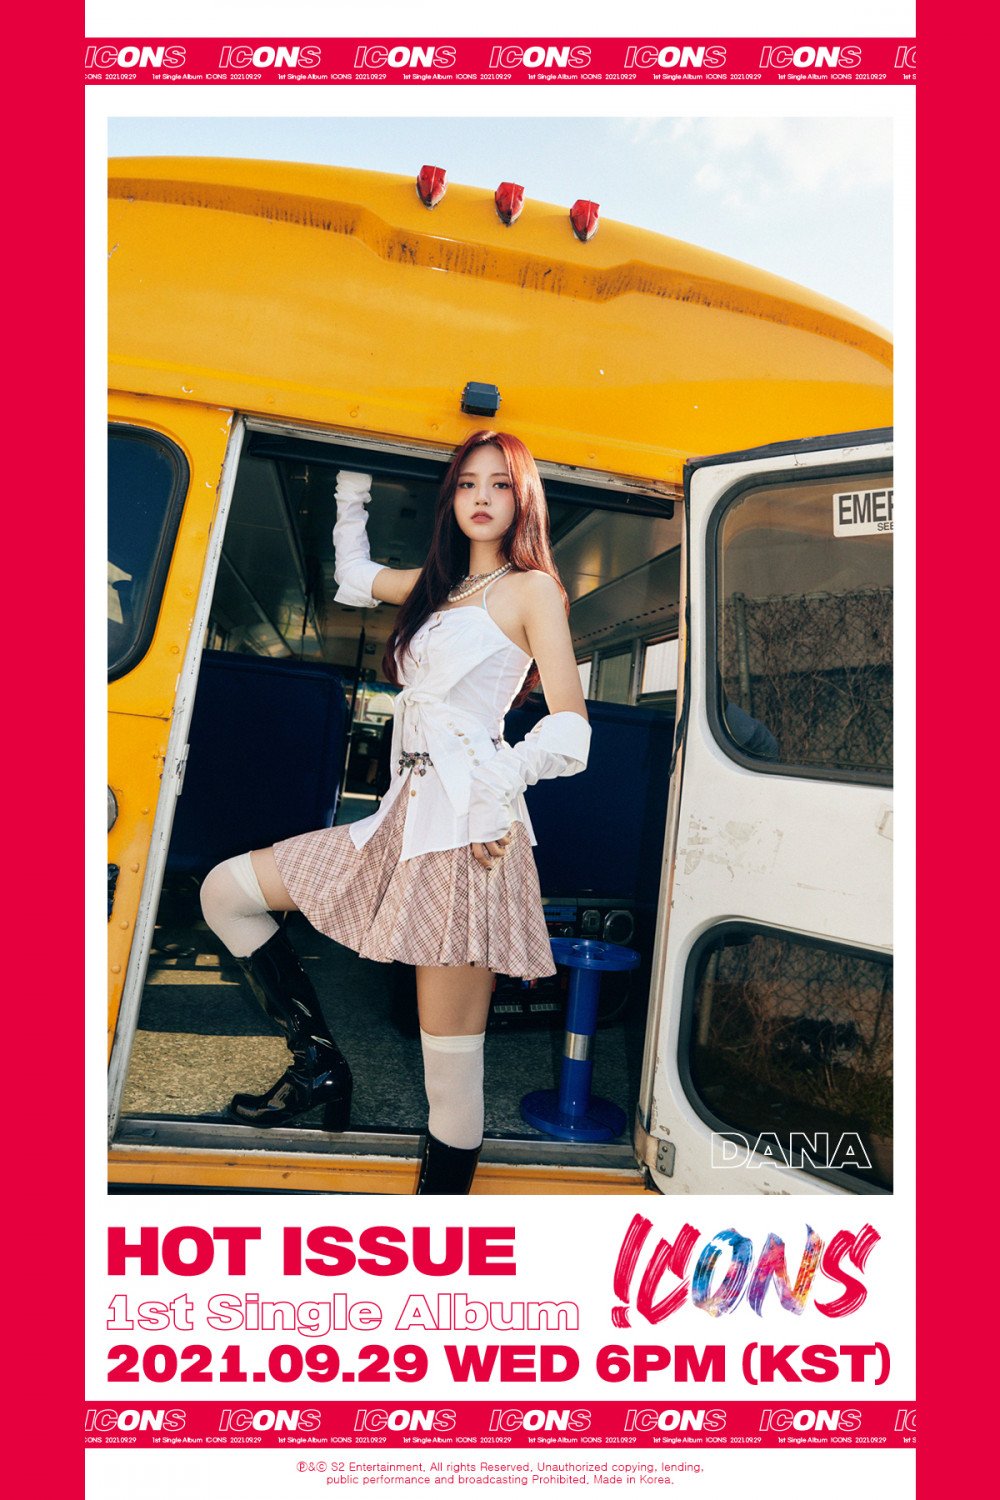 HOT ISSUE - Dana's teasers for 'ICONS'